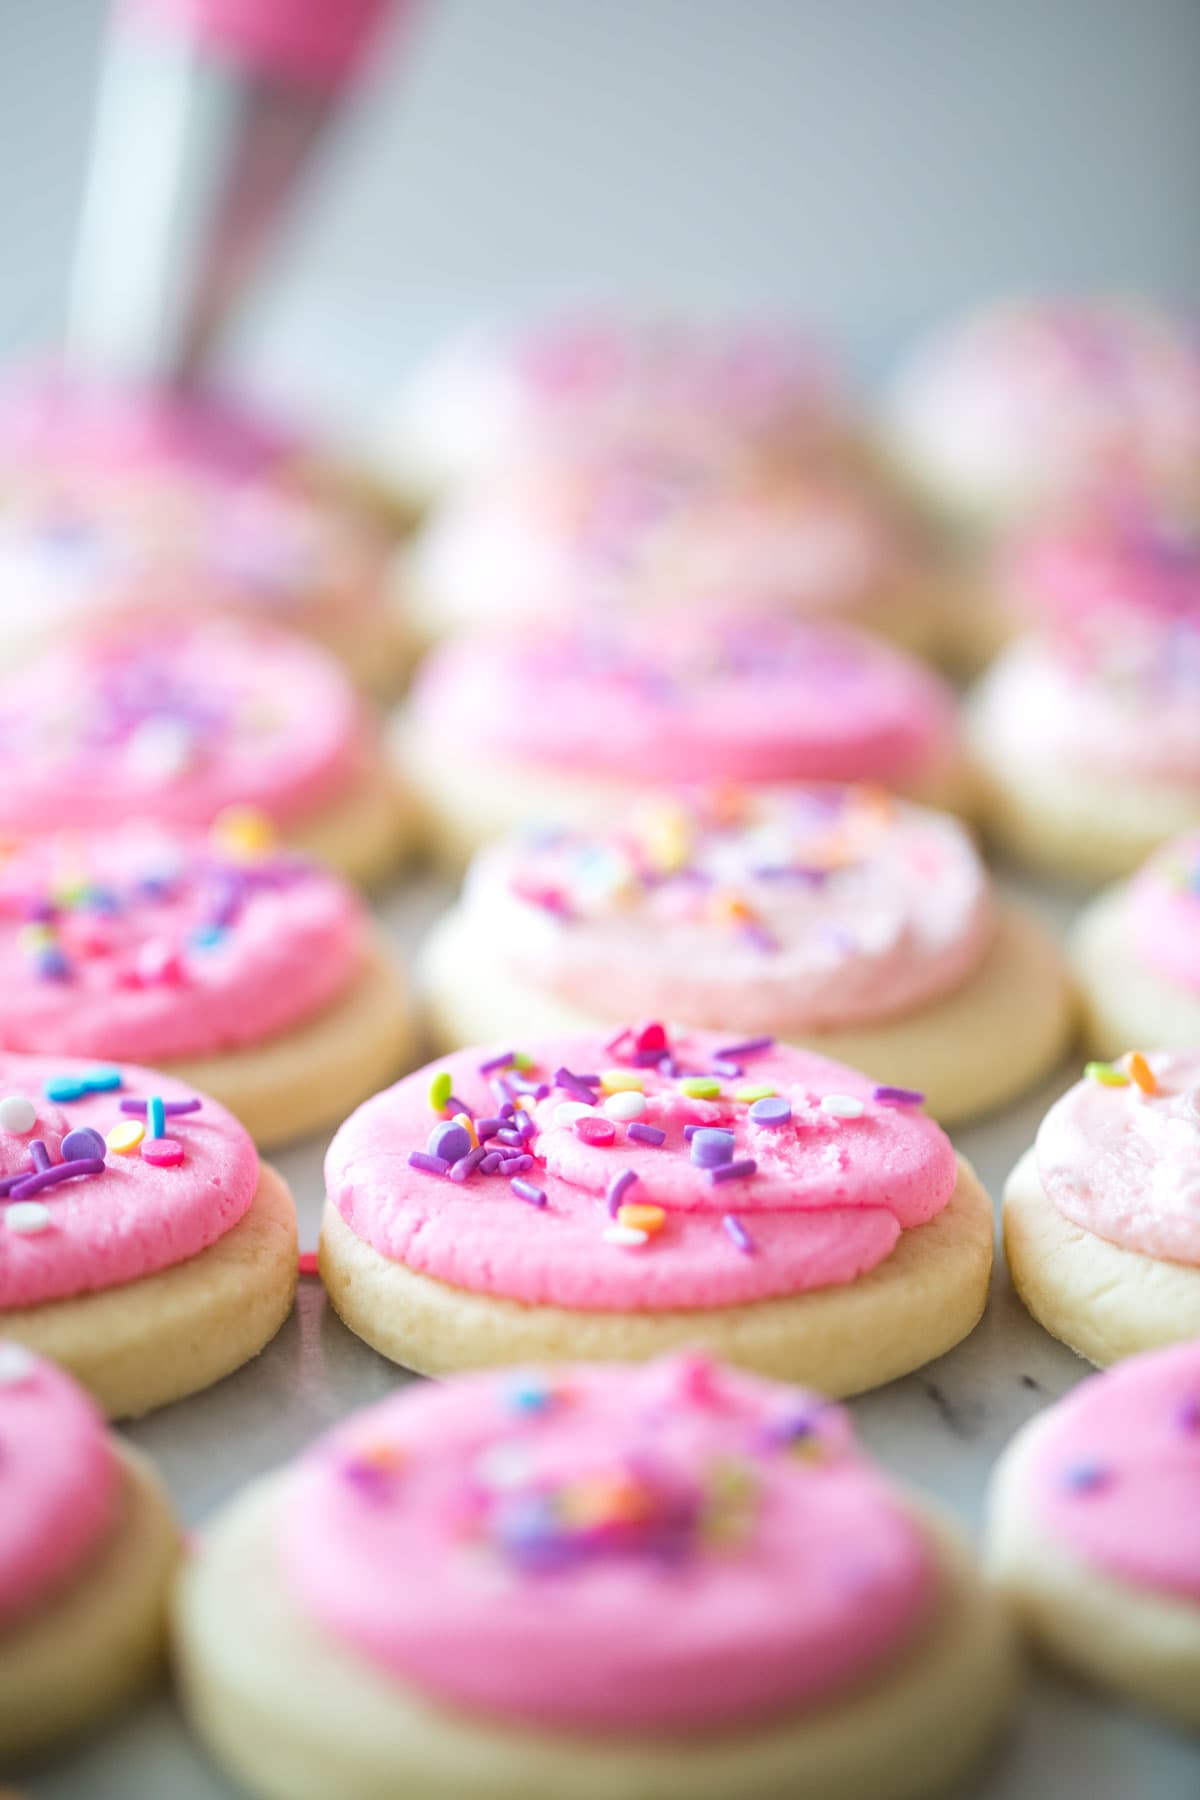 rows of precisely cut round cookies topped with pink icing and sprinkles